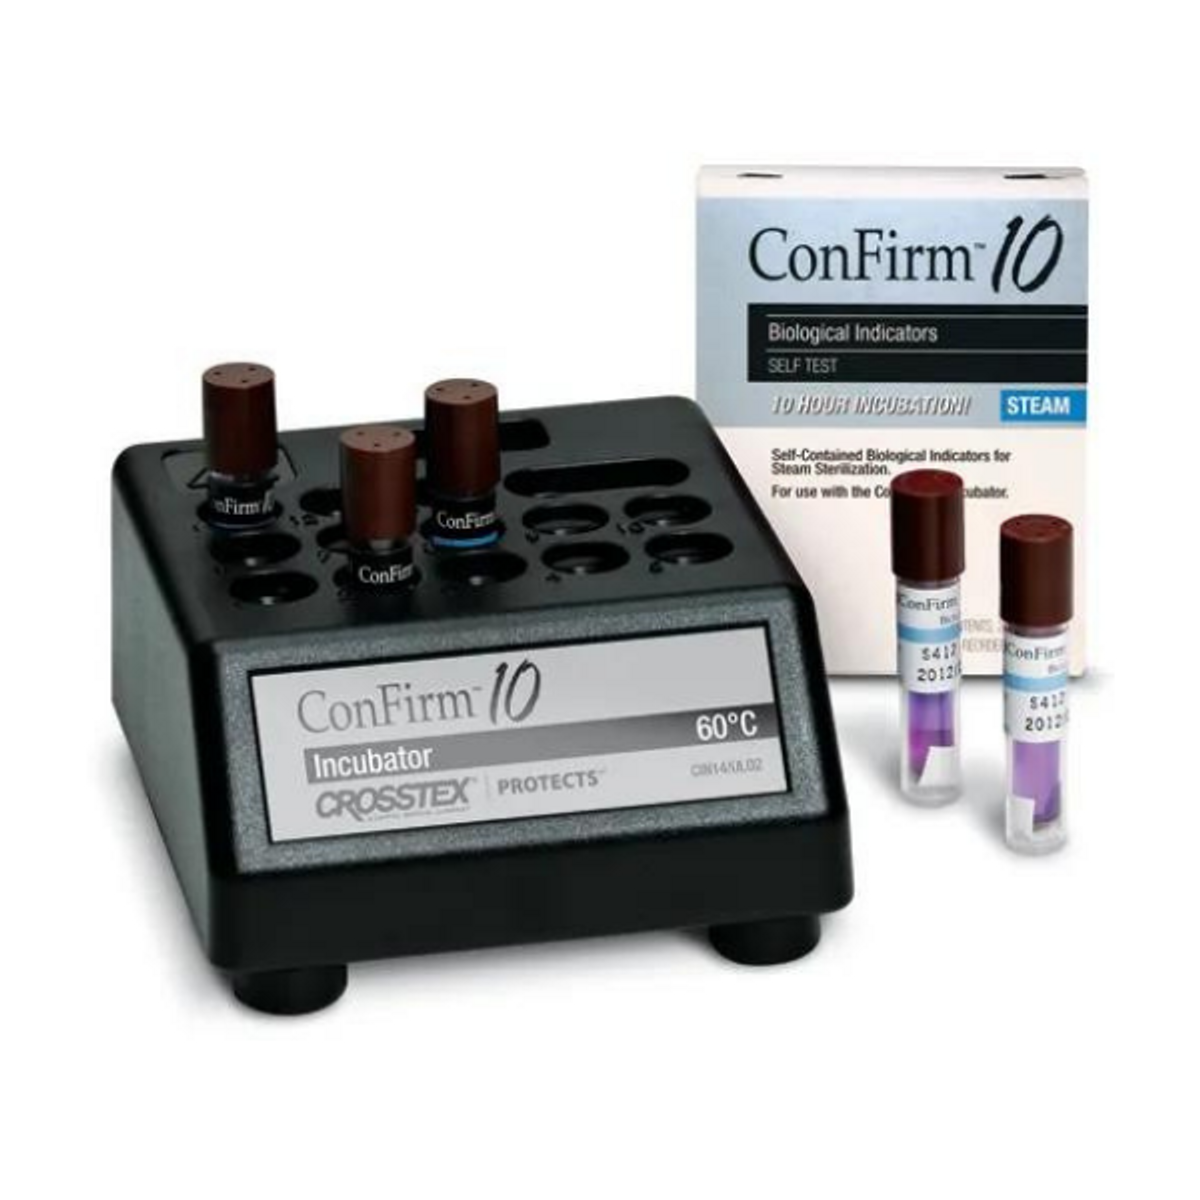 Crosstex Confirm 10 In Office Biological Monitoring System